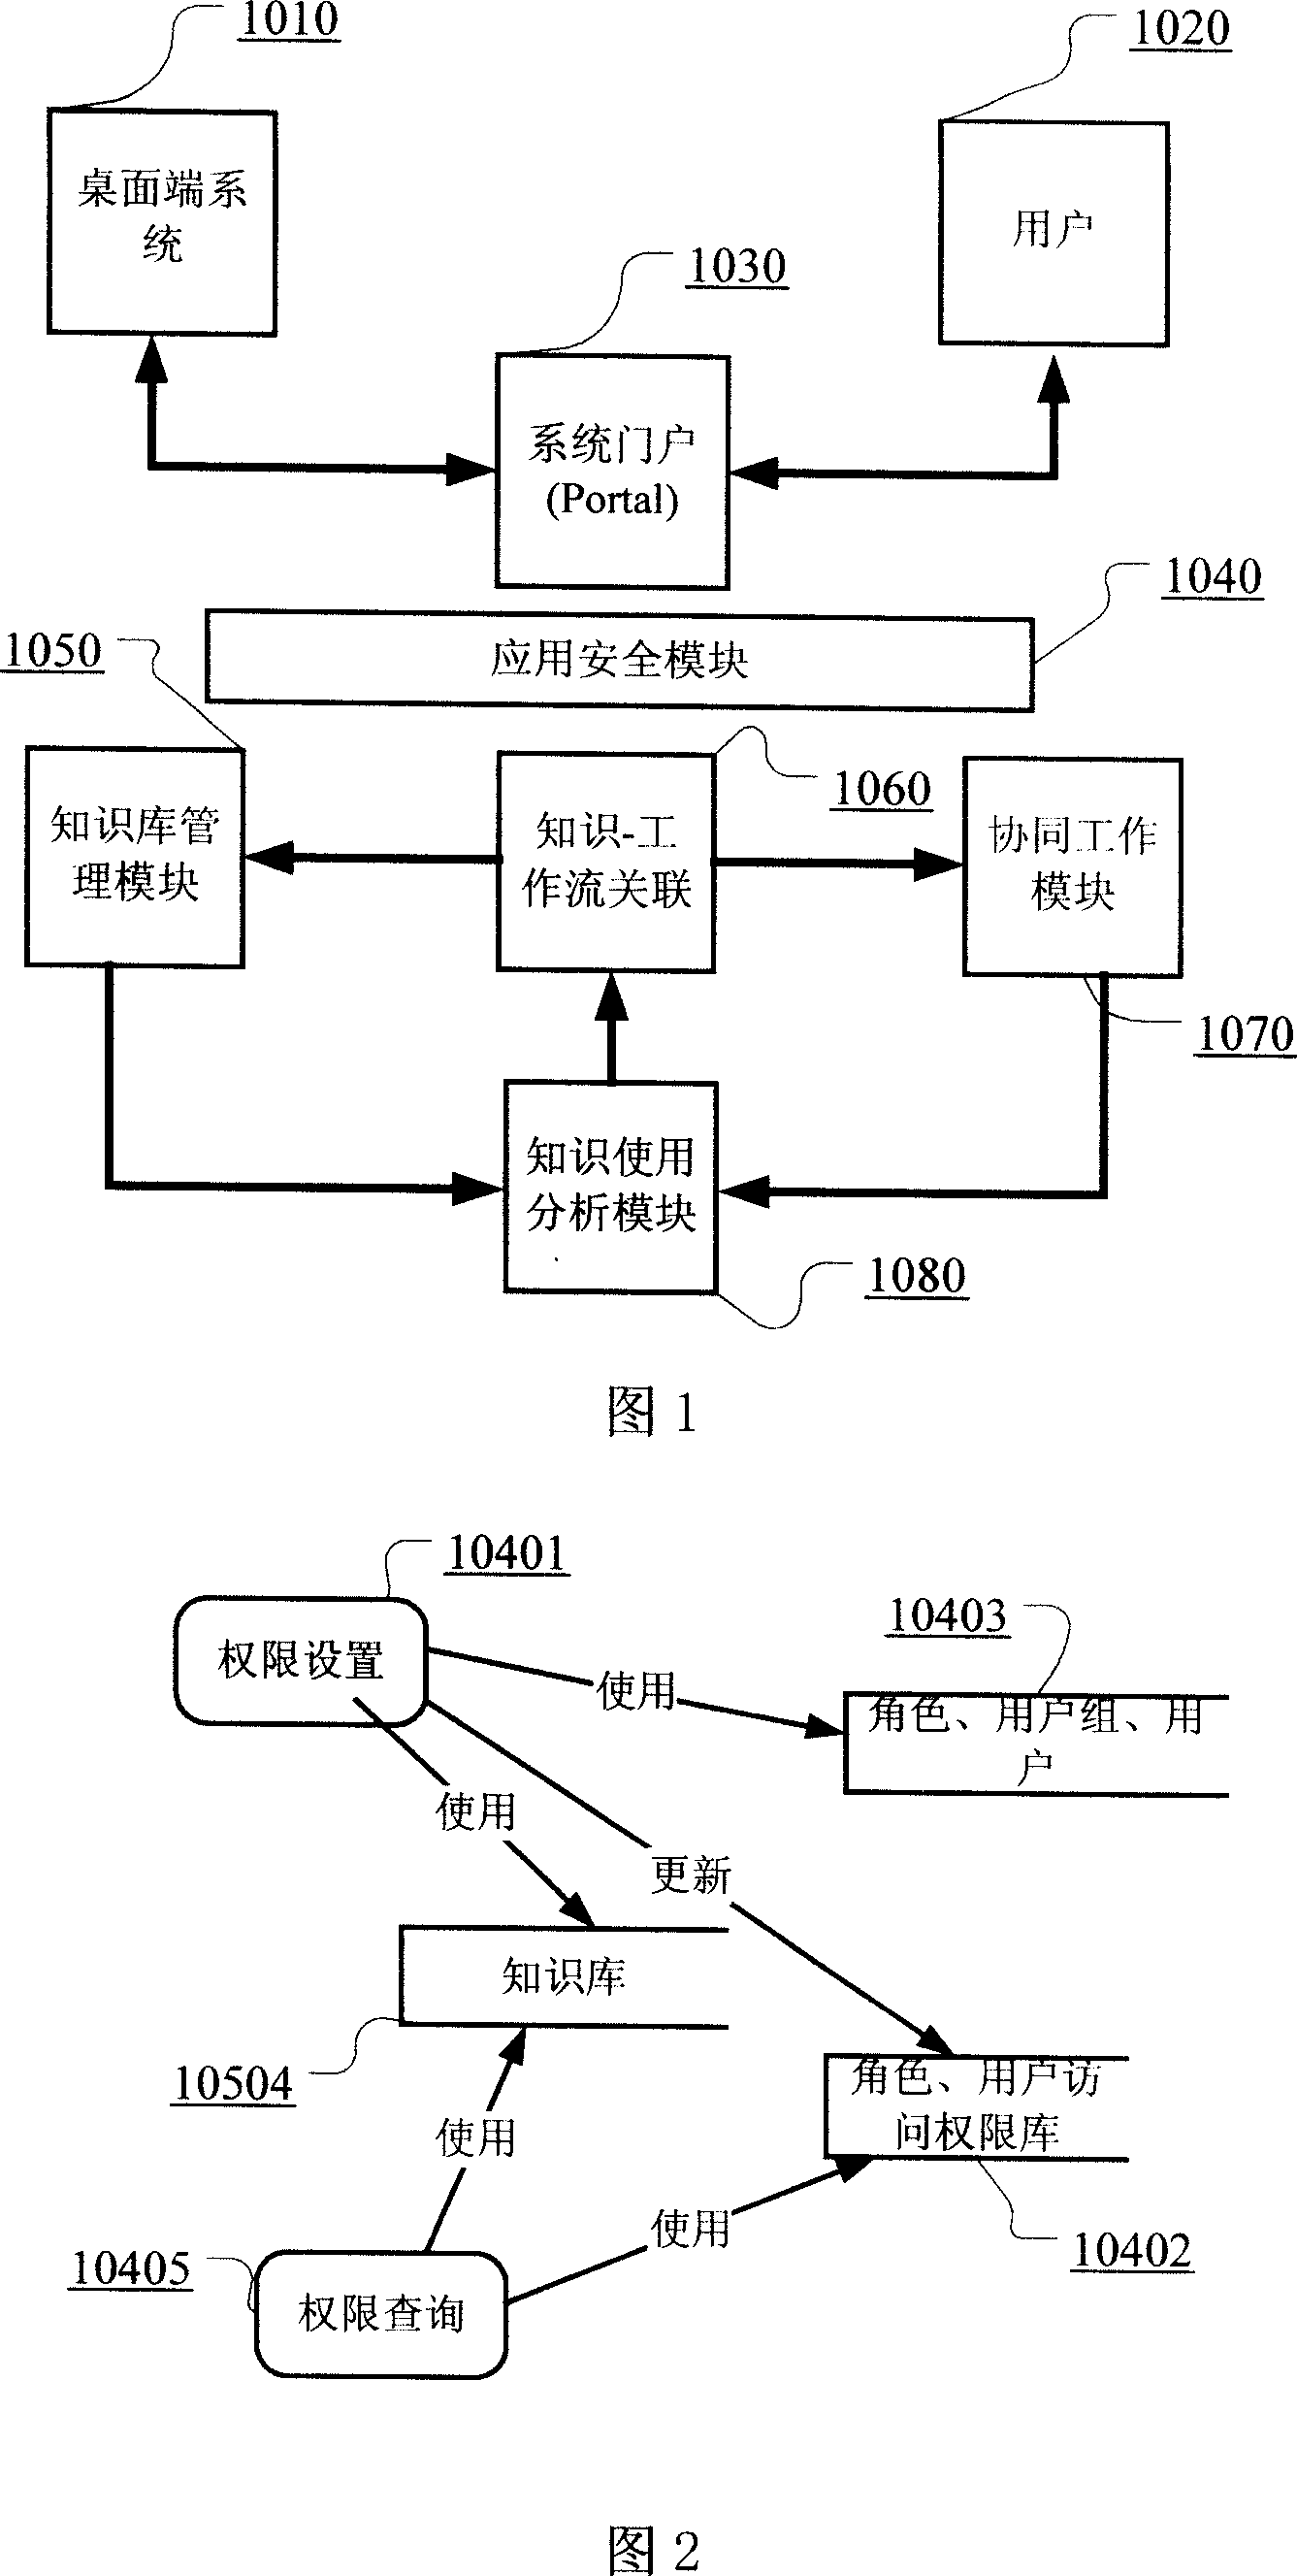 System for managing knowledge facing cooperated work